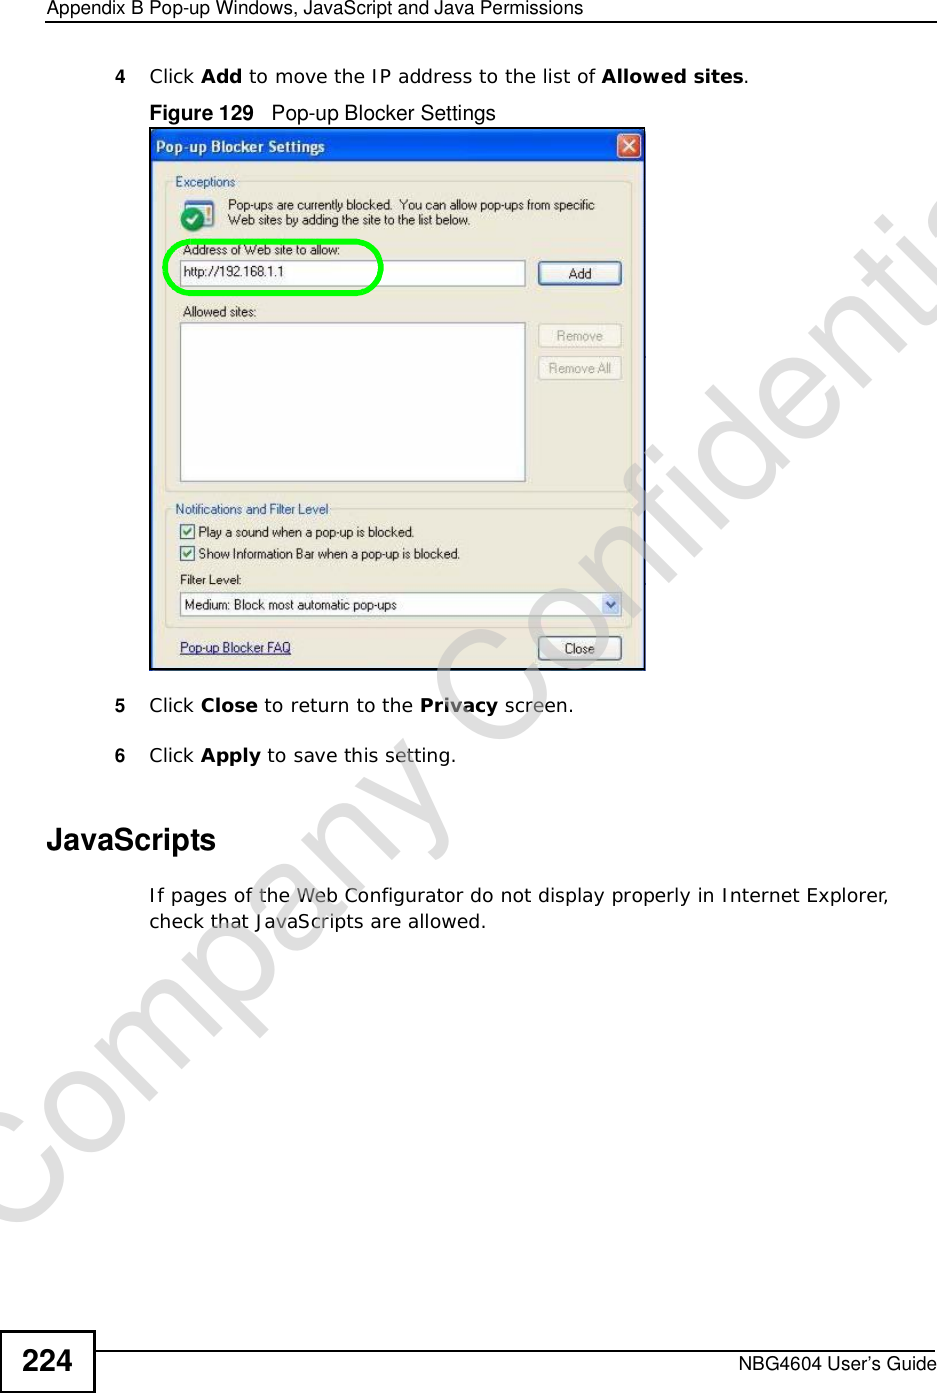 Appendix BPop-up Windows, JavaScript and Java PermissionsNBG4604 User’s Guide2244Click Add to move the IP address to the list of Allowed sites.Figure 129   Pop-up Blocker Settings5Click Close to return to the Privacy screen. 6Click Apply to save this setting. JavaScriptsIf pages of the Web Configurator do not display properly in Internet Explorer, check that JavaScripts are allowed. Company Confidential